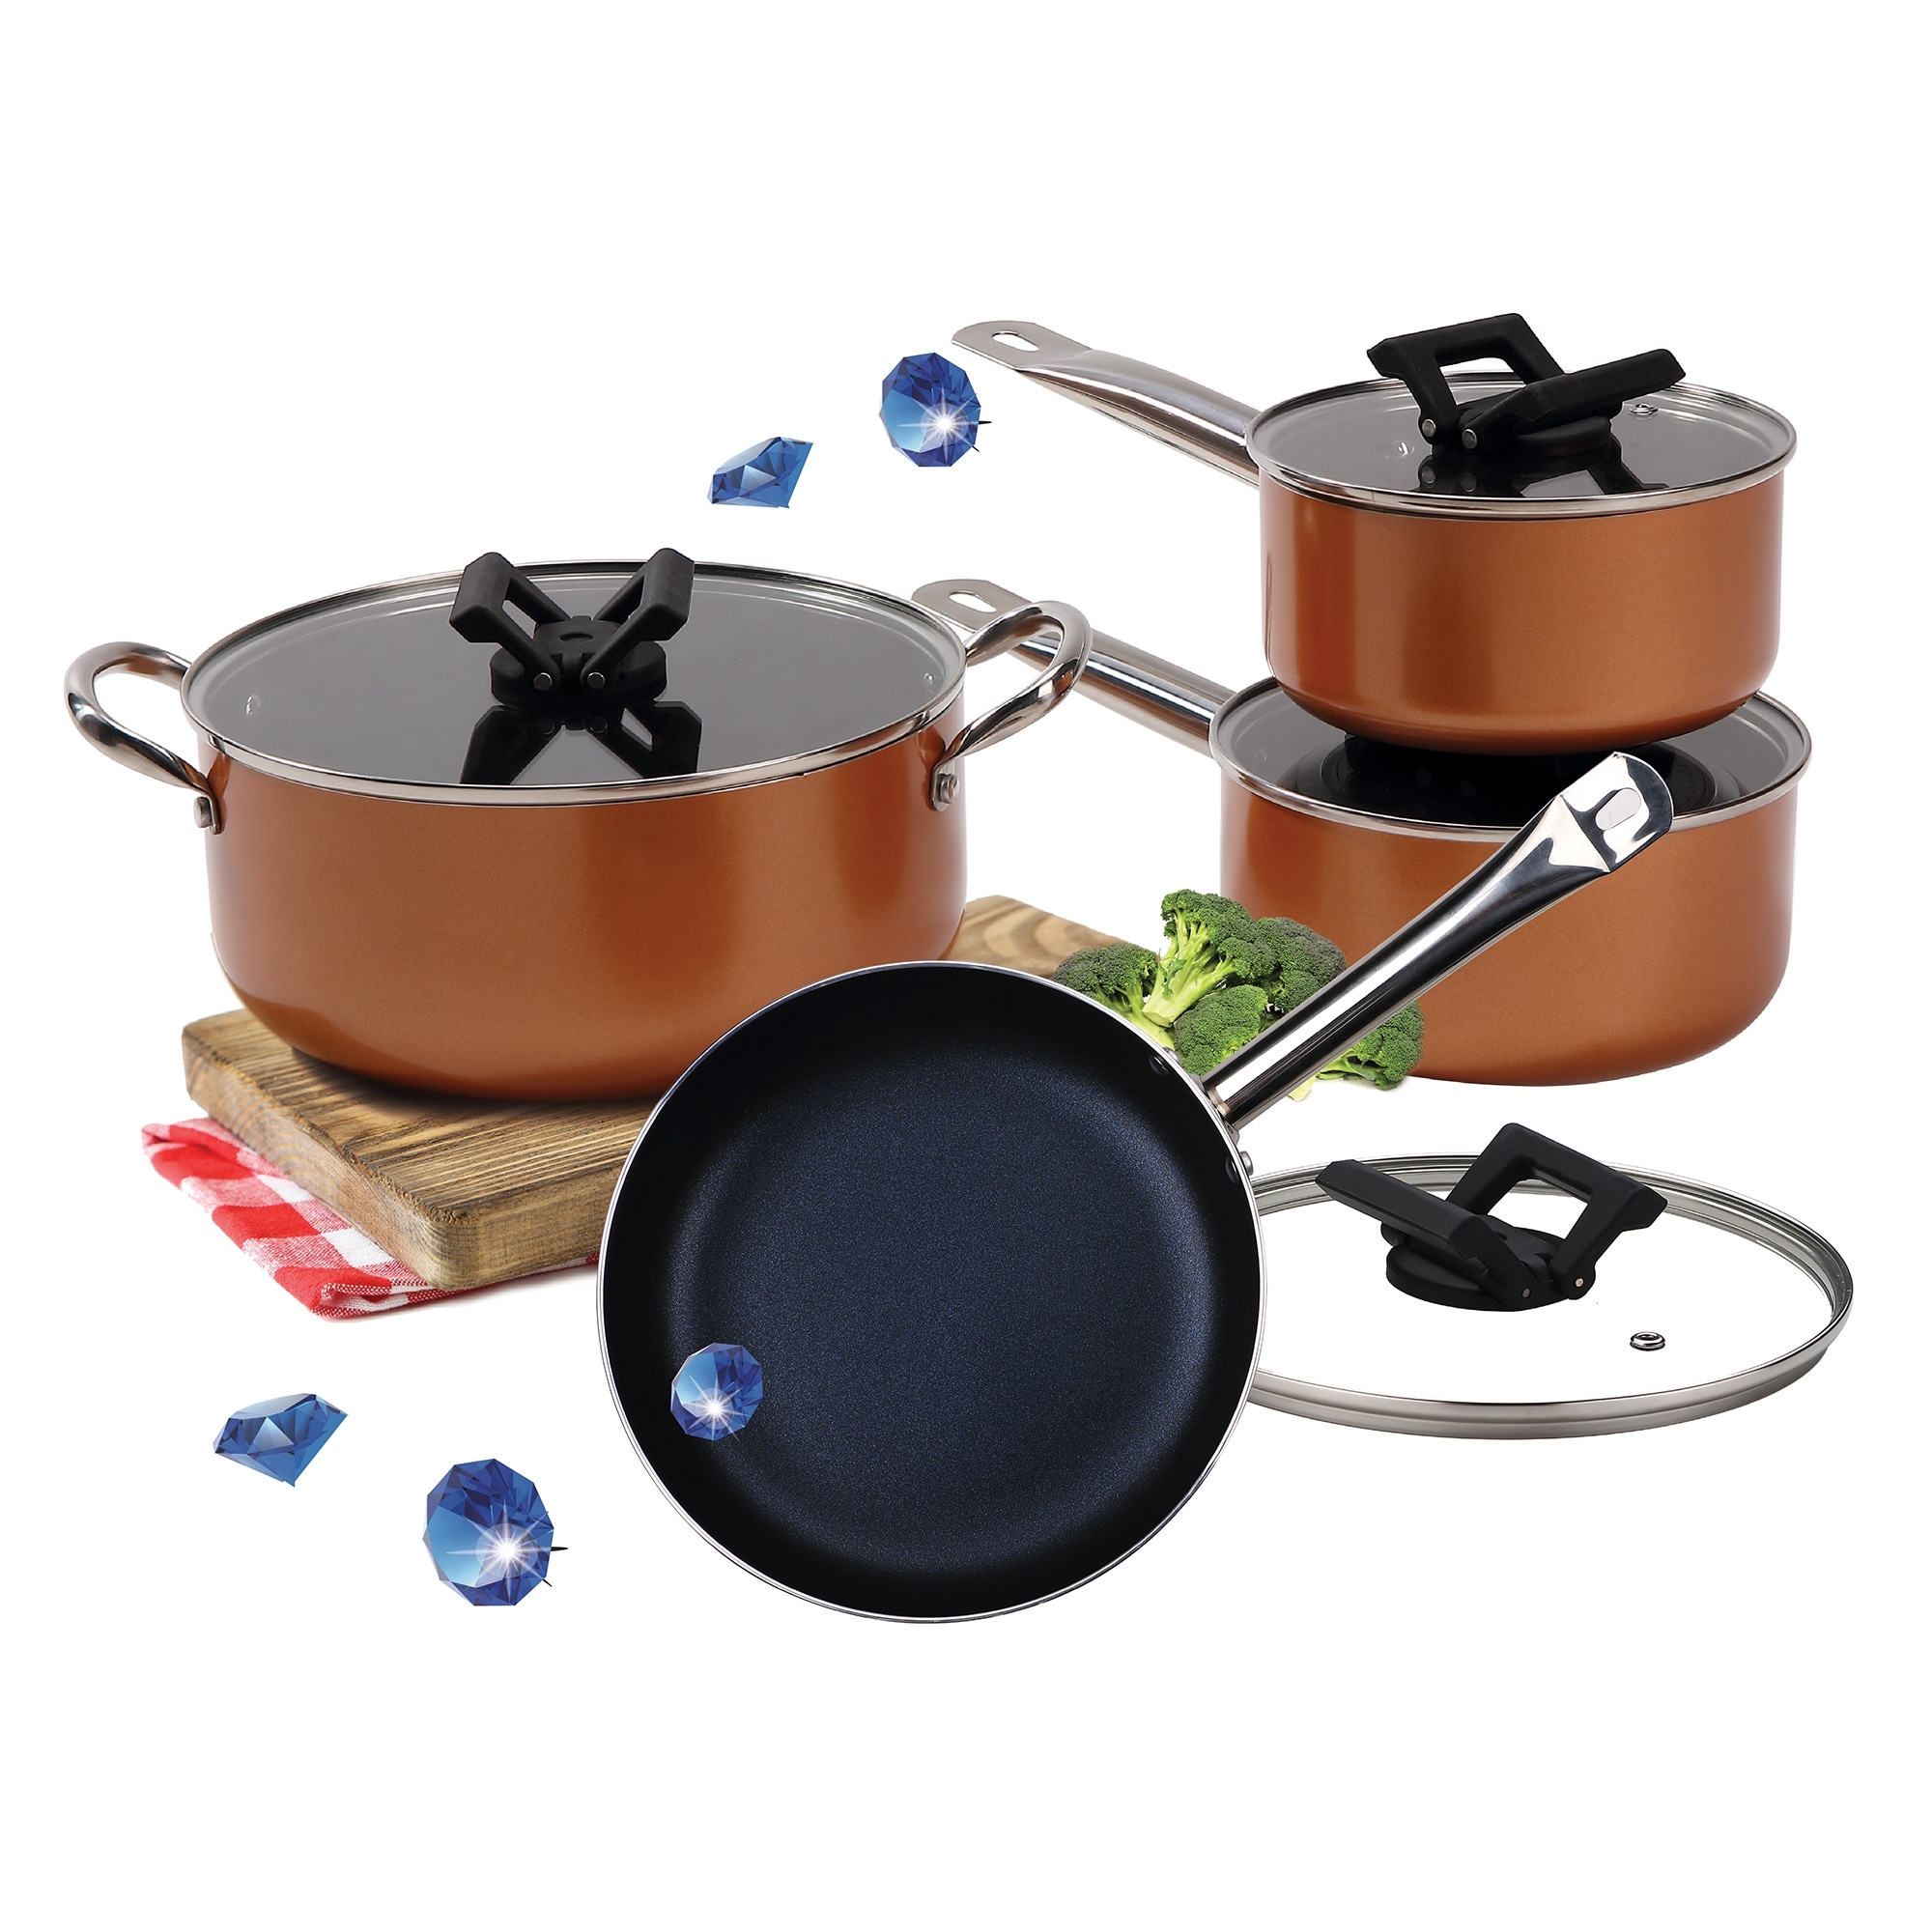 https://ak1.ostkcdn.com/images/products/is/images/direct/44f30ea0db8767852cadc4dbc992502fba826de1/Gourmet-Edge-8pc-Stackable-Nonstick-Cookware-Set.jpg